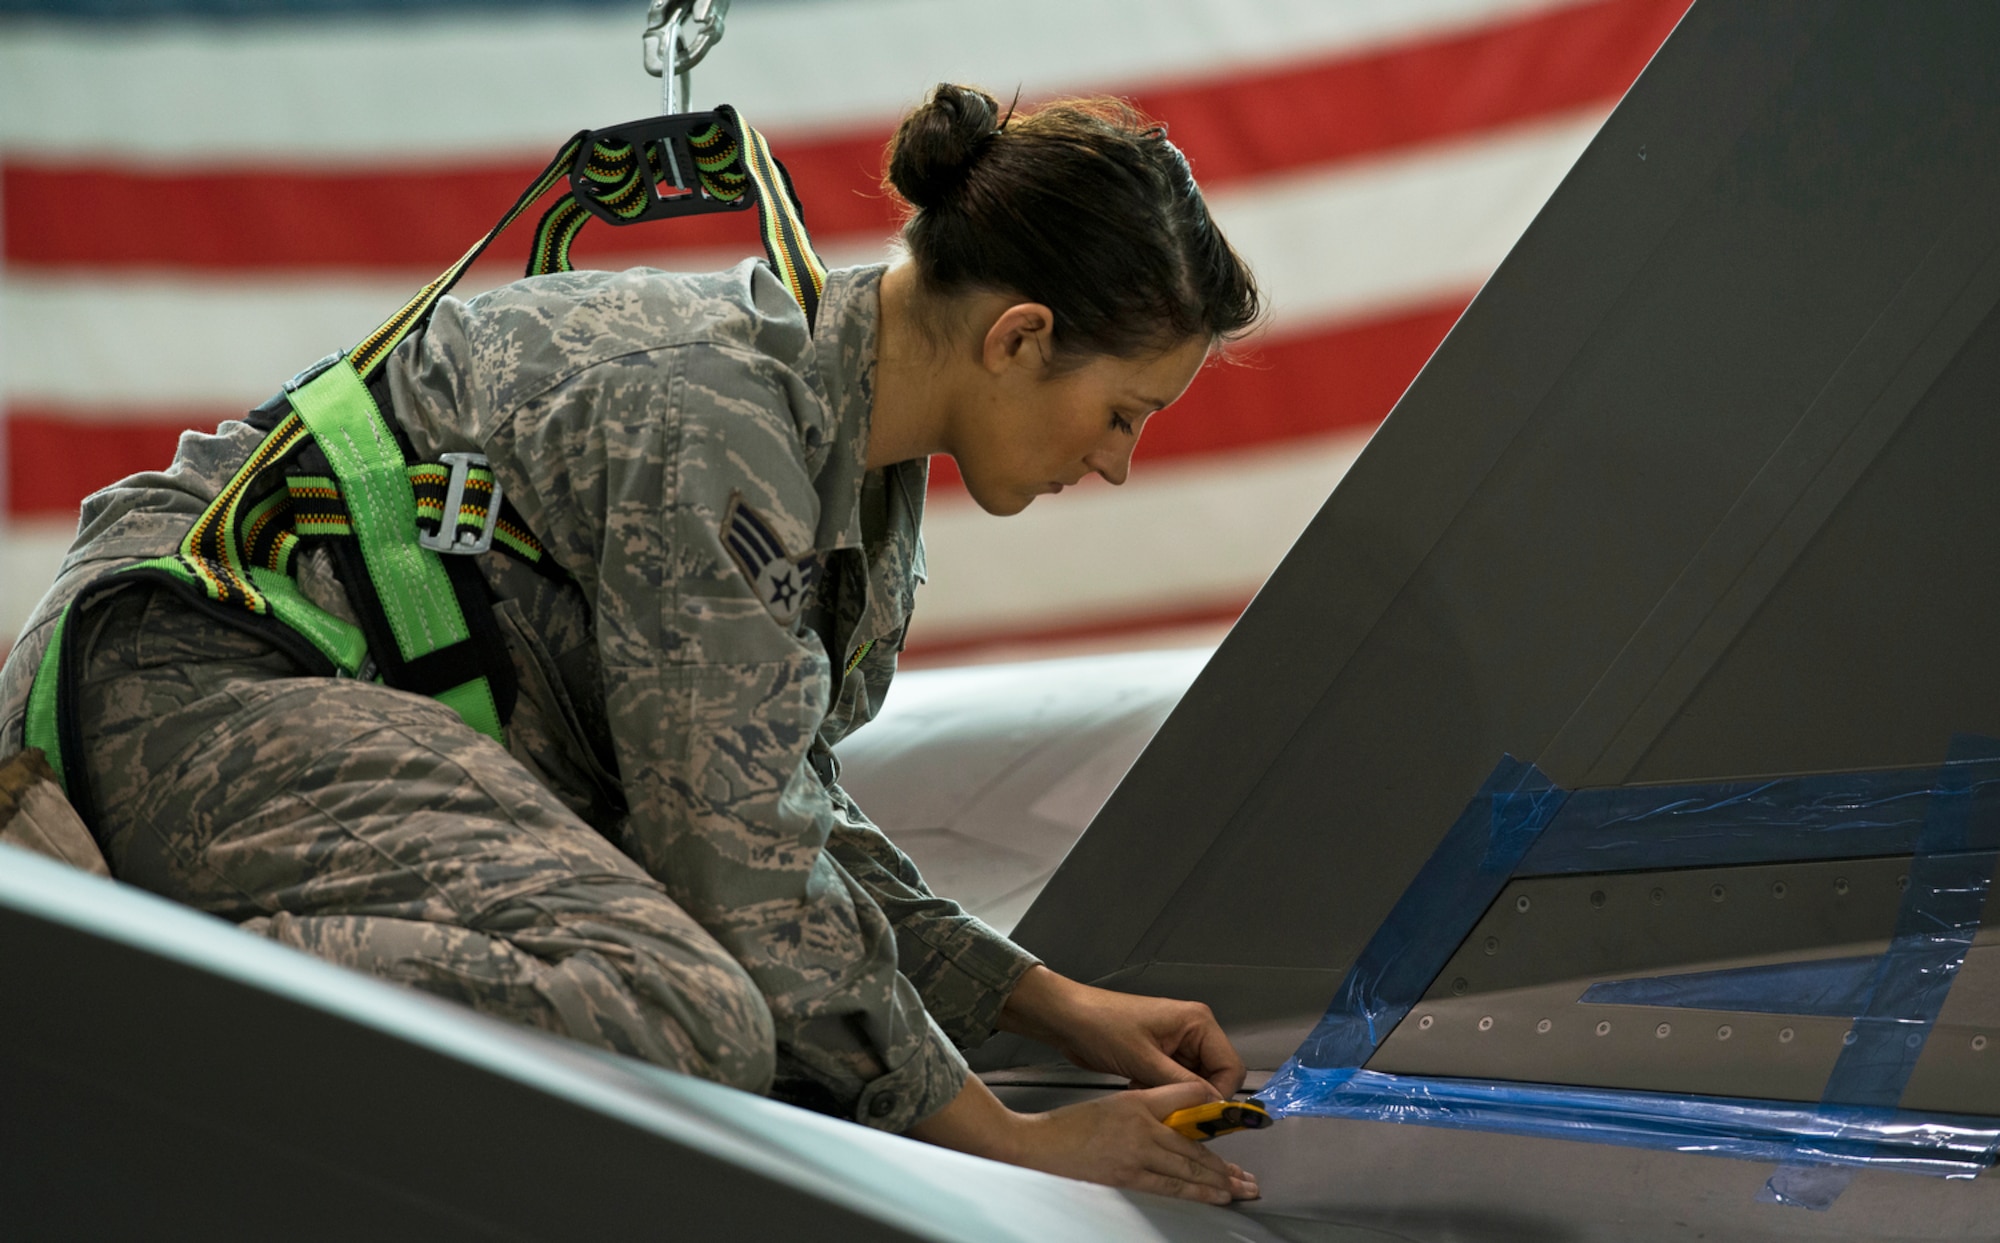 Senior Airman Jessa Fleming, a low observable technician, masks areas of an F-35 Lightning II in need of metal repair work. Fleming is responsible for maintaining the stealth characteristics of the Joint Strike Fighter. (U.S. Air Force photo/Tech. Sgt. Bennie J. Davis III)